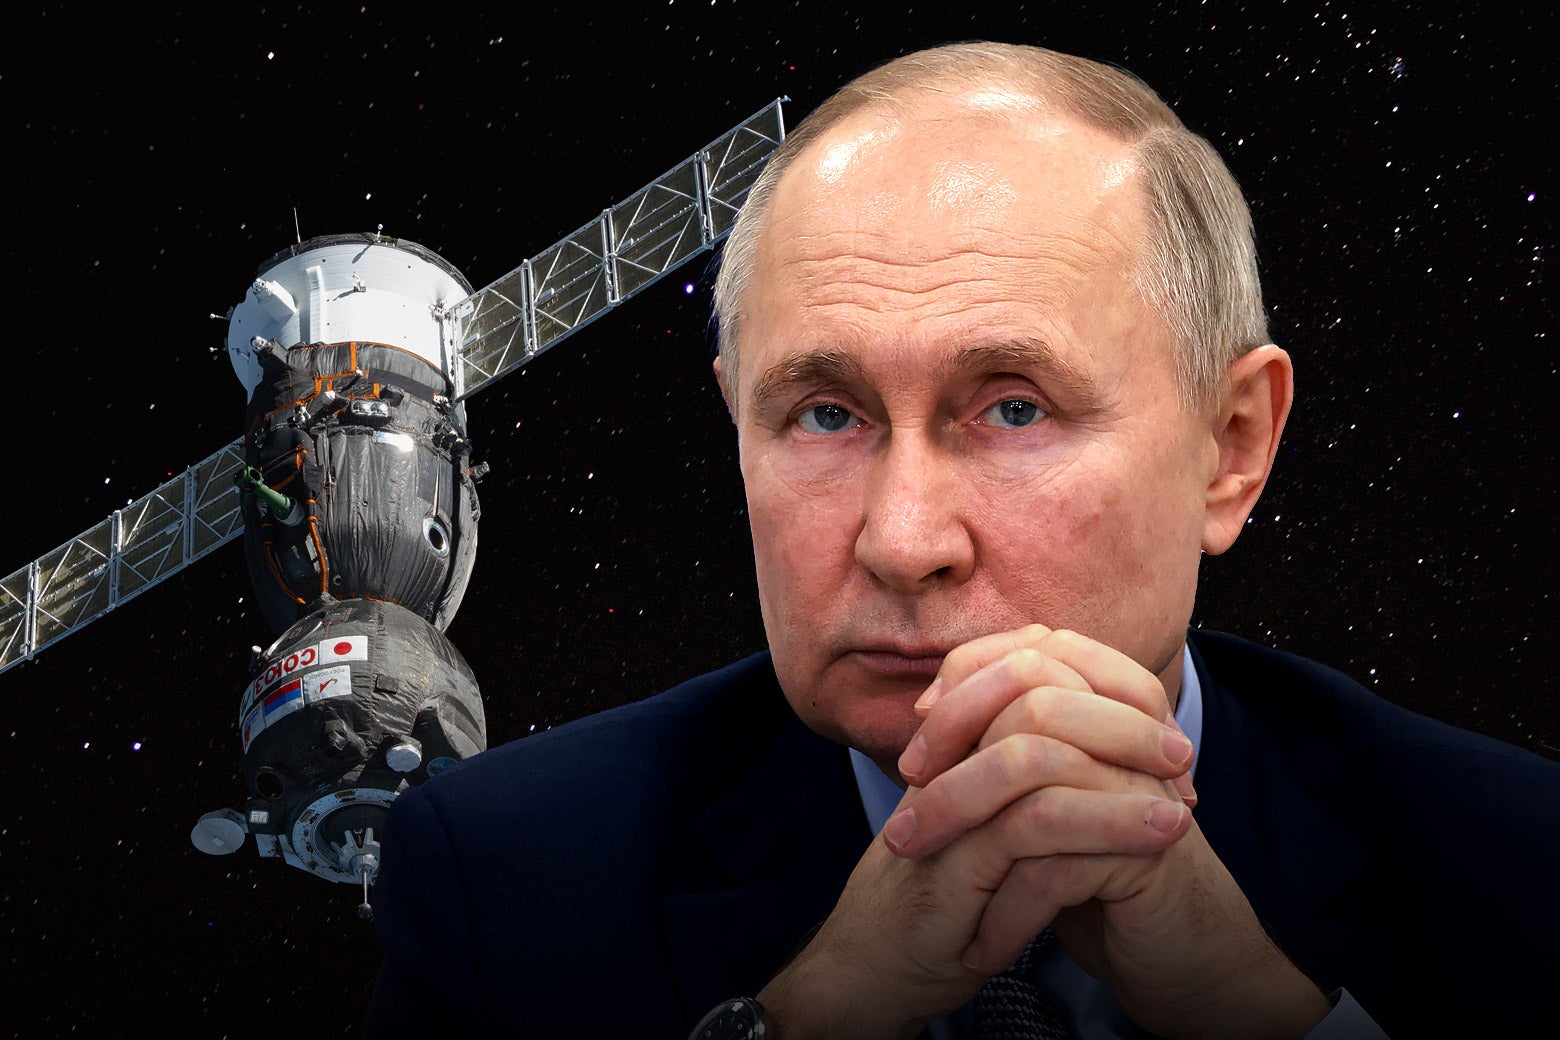 A photo illustration of Putin in the foreground, with outer space and a satellite in the background.